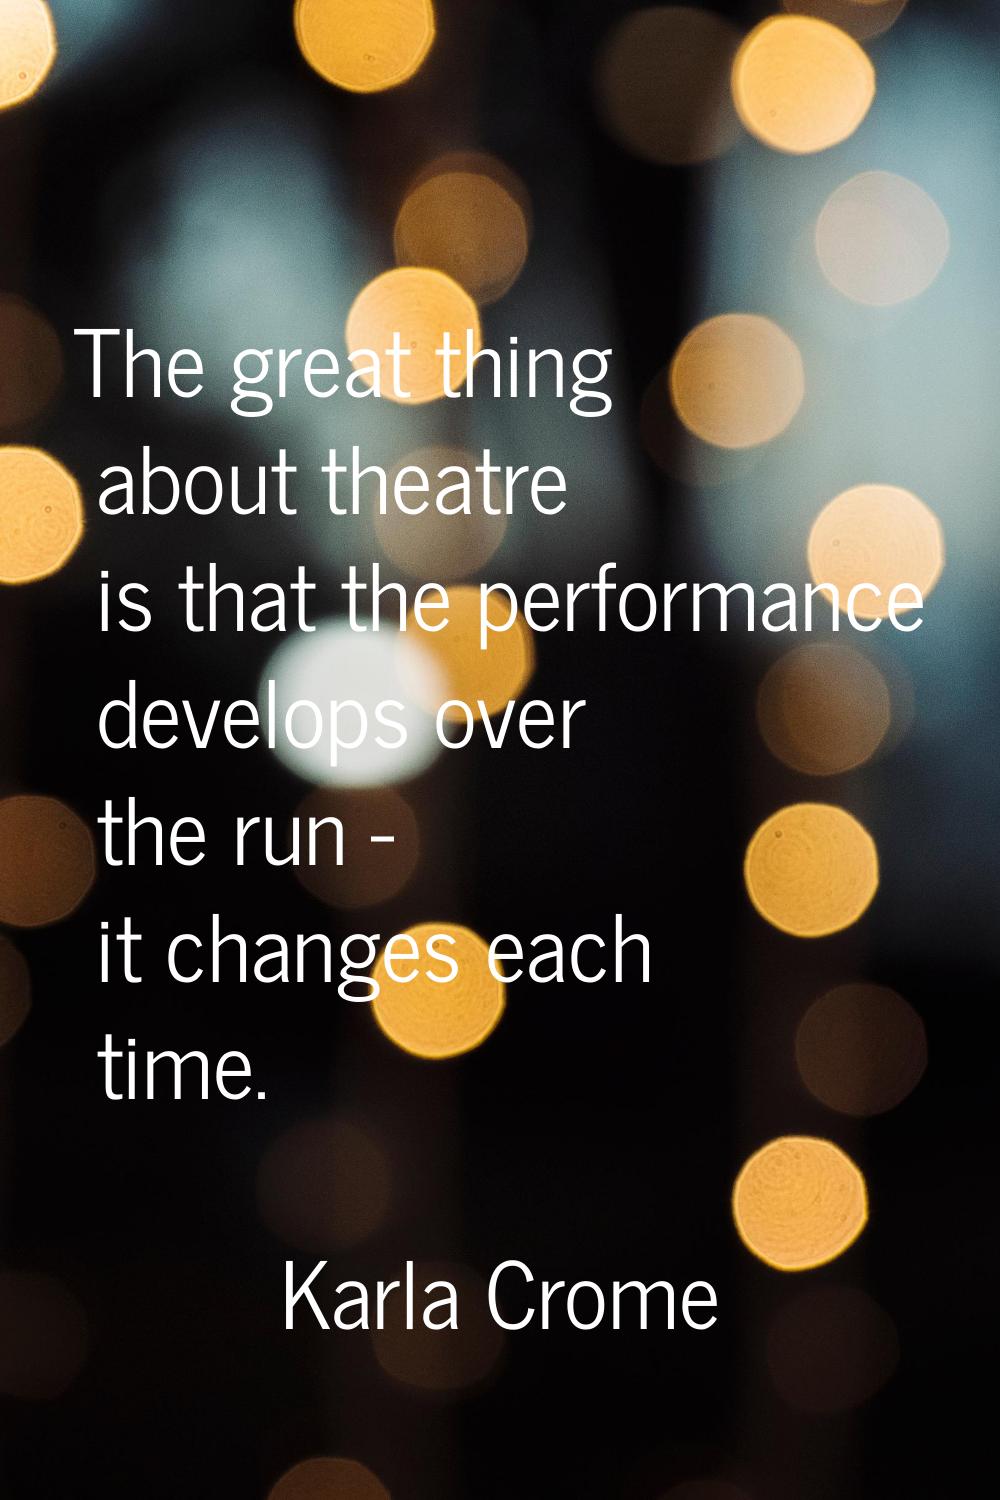 The great thing about theatre is that the performance develops over the run - it changes each time.